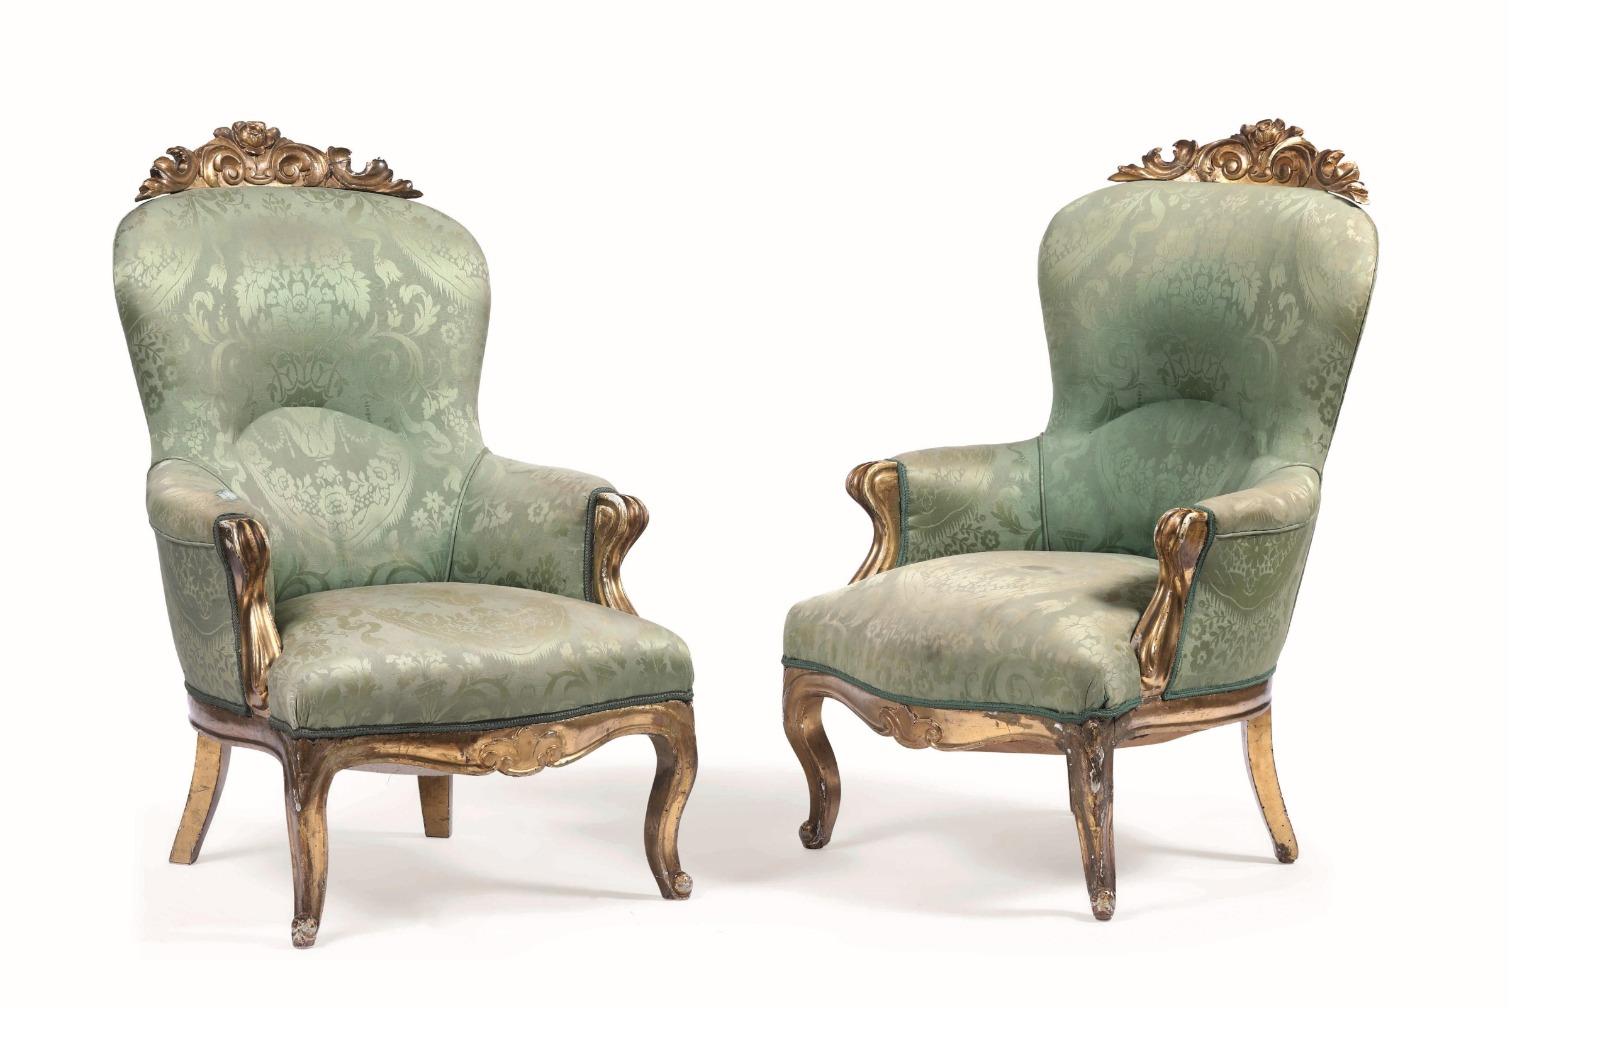 Hand-Crafted Pair of Italian Armchairs in Carved and Gilded Wood 19th Century For Sale